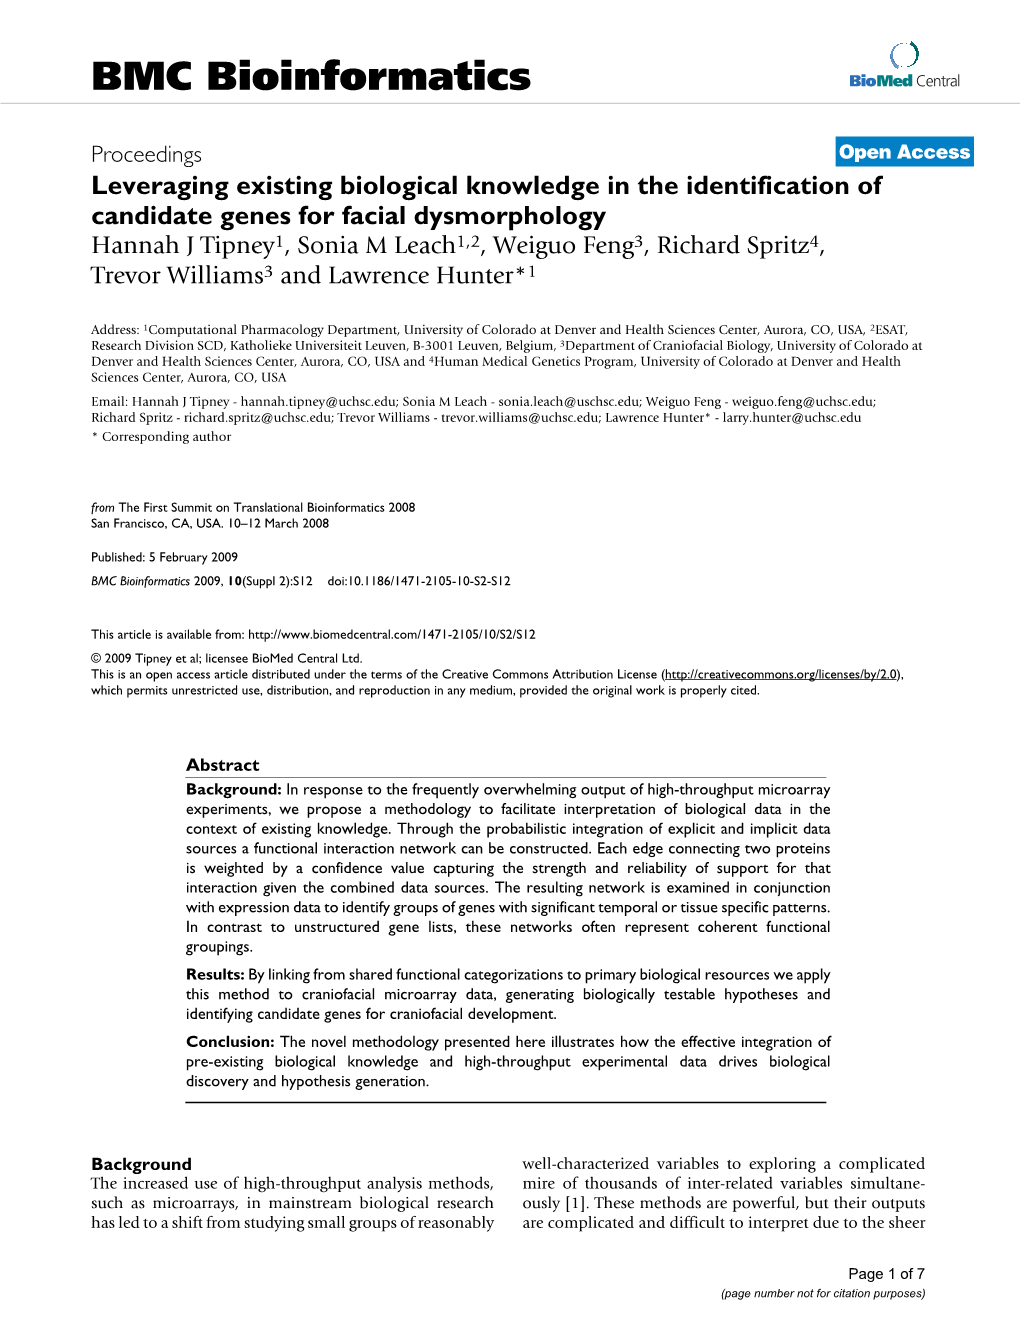 Leveraging Existing Biological Knowledge in the Identification Of